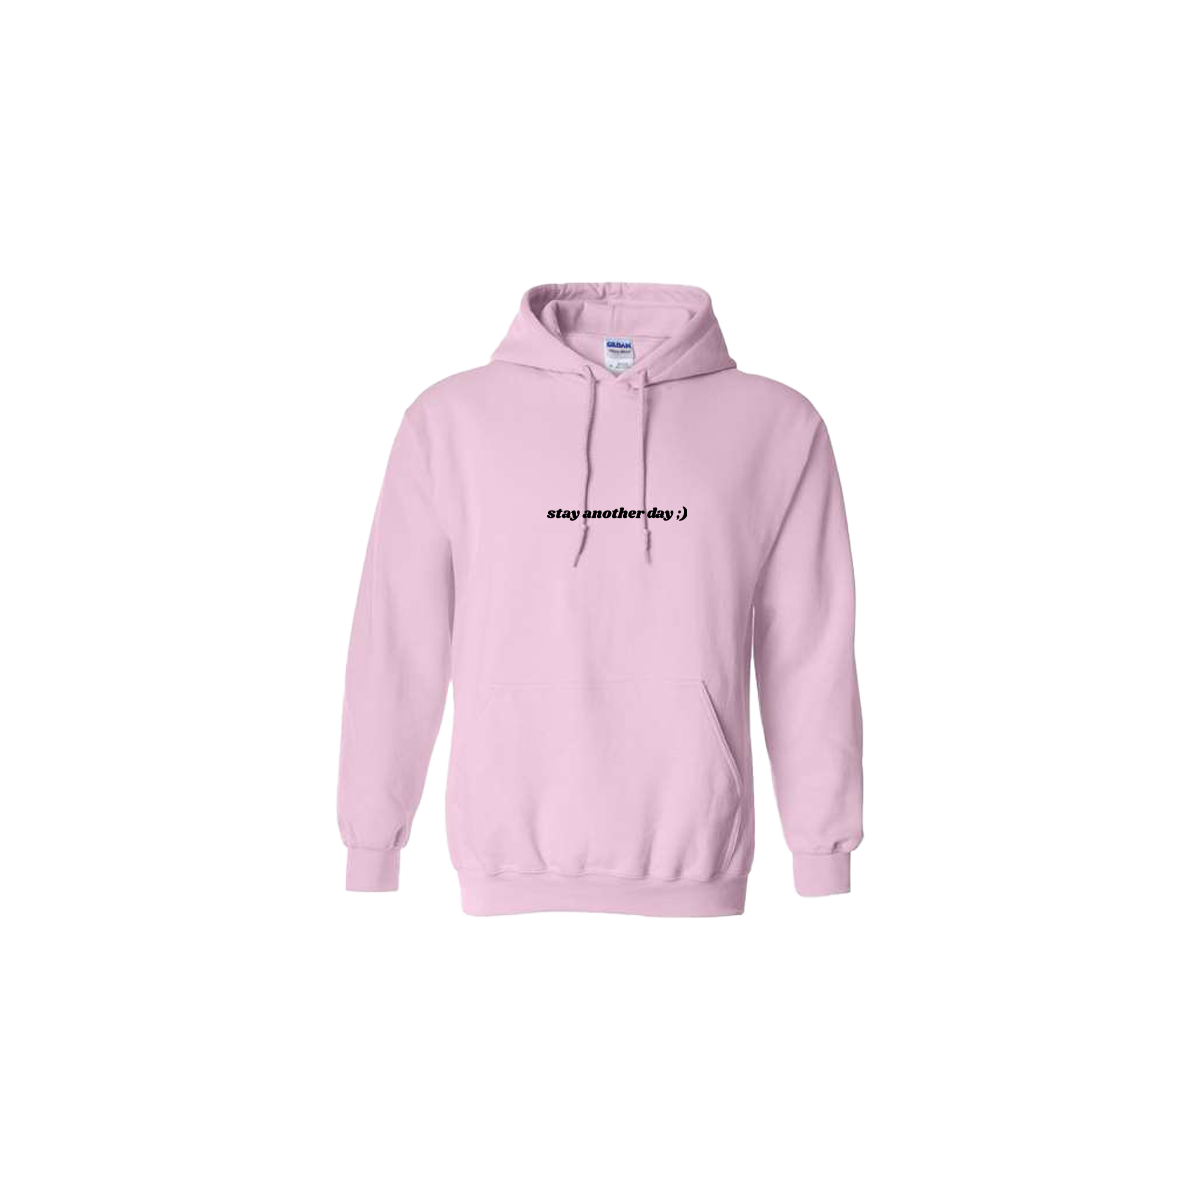 Stay Another Day Embroidered Light Pink Hoodie - Mental Health Awareness Clothing